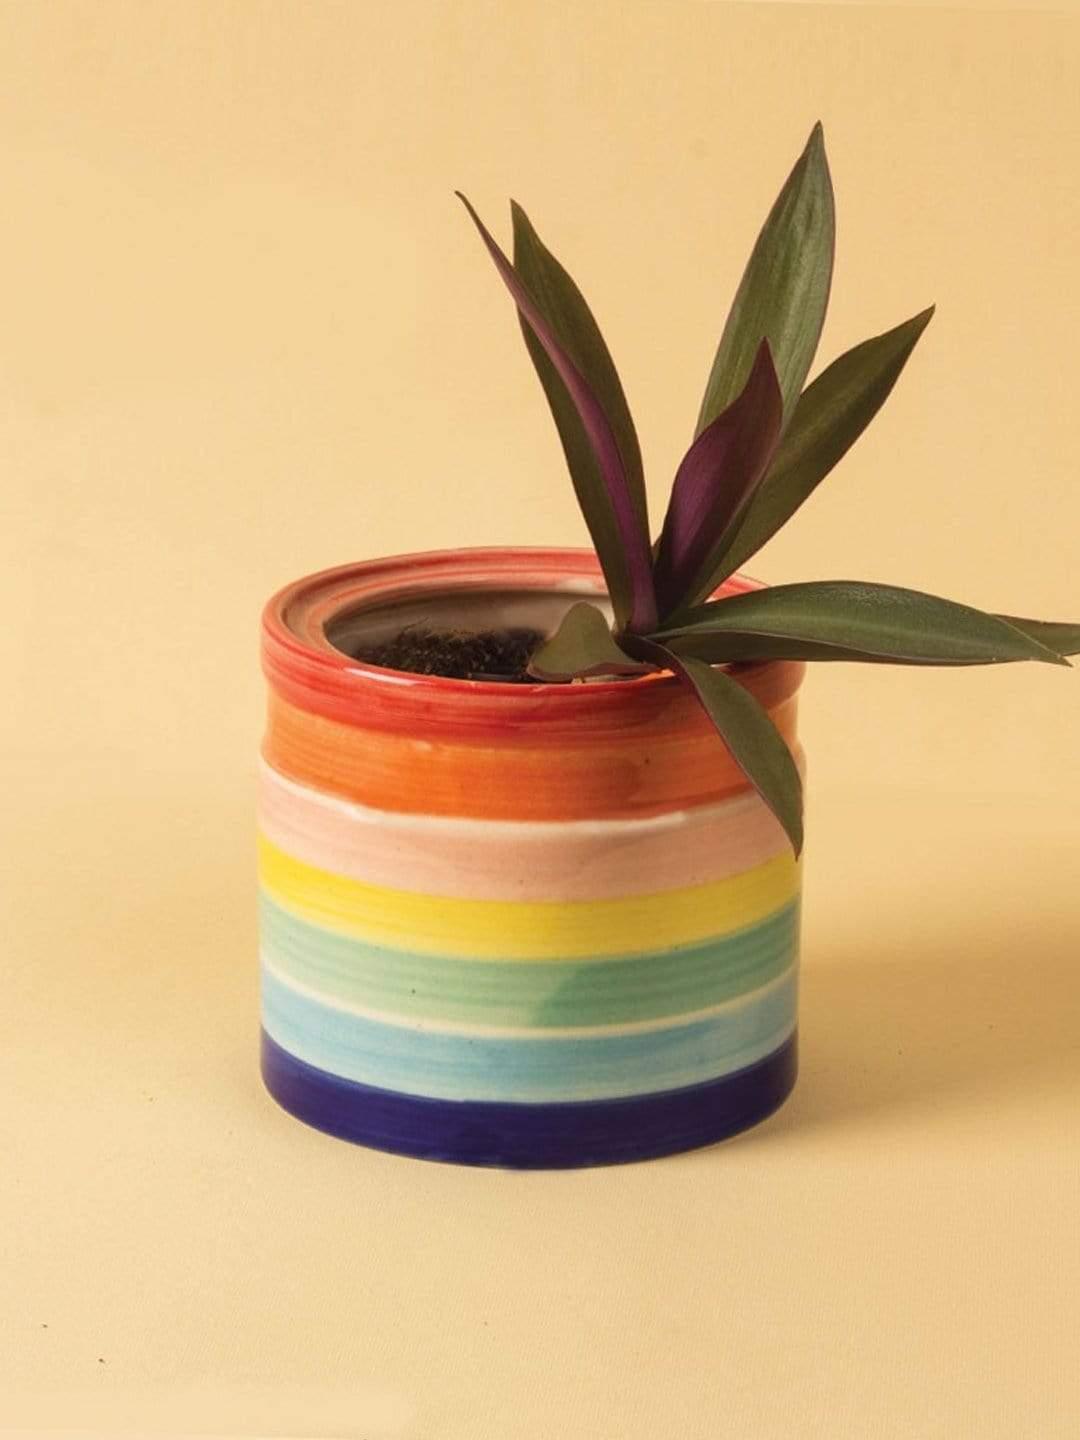 Band Of Color Planter - The Wishing Chair